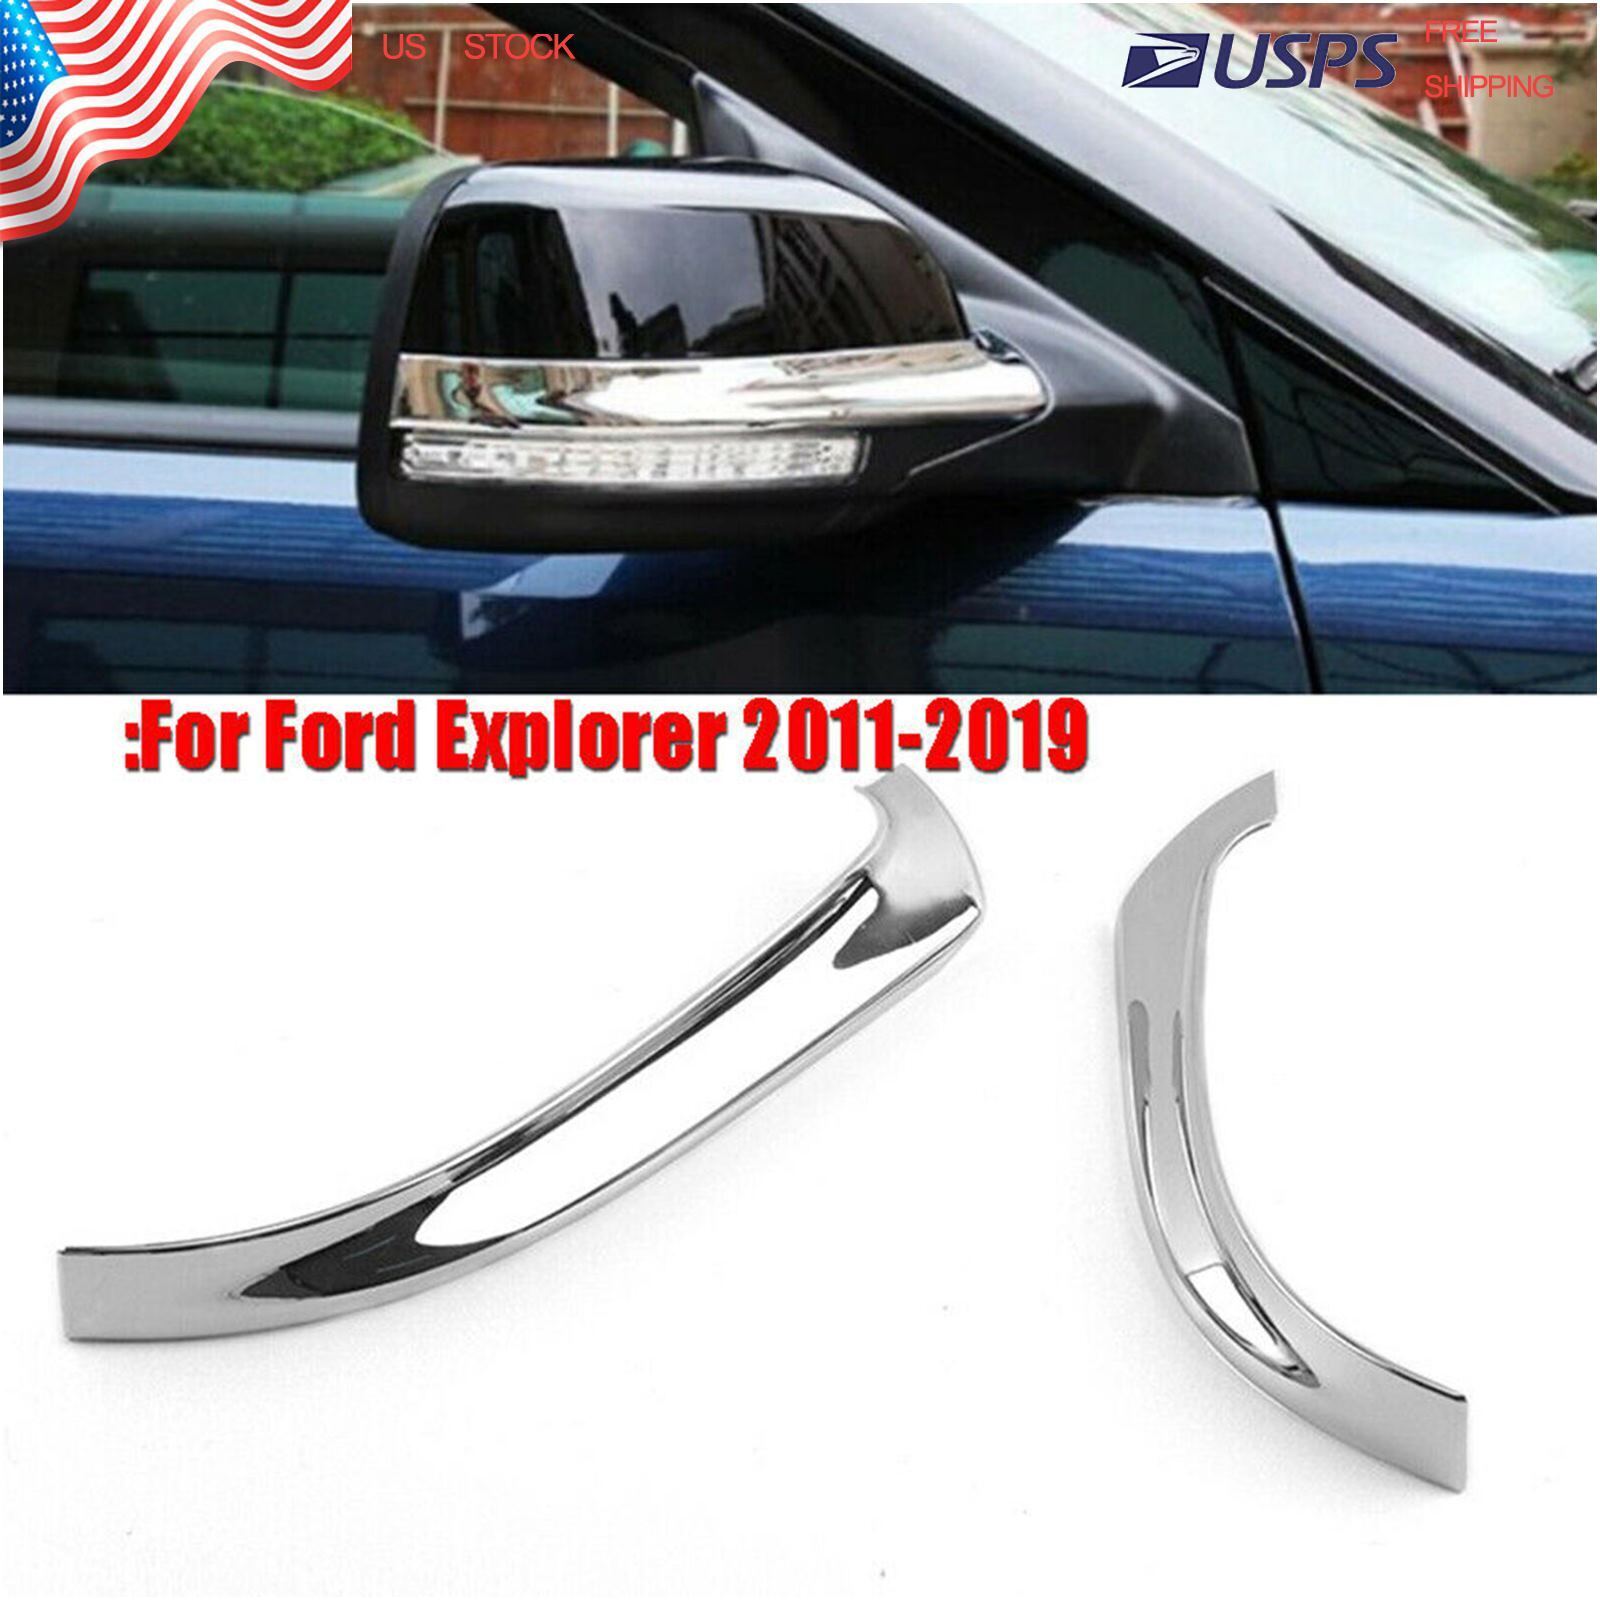 2pc Chrome Silver Exterior Side Mirror Rear View Cap ABS Trim For Ford Explorer